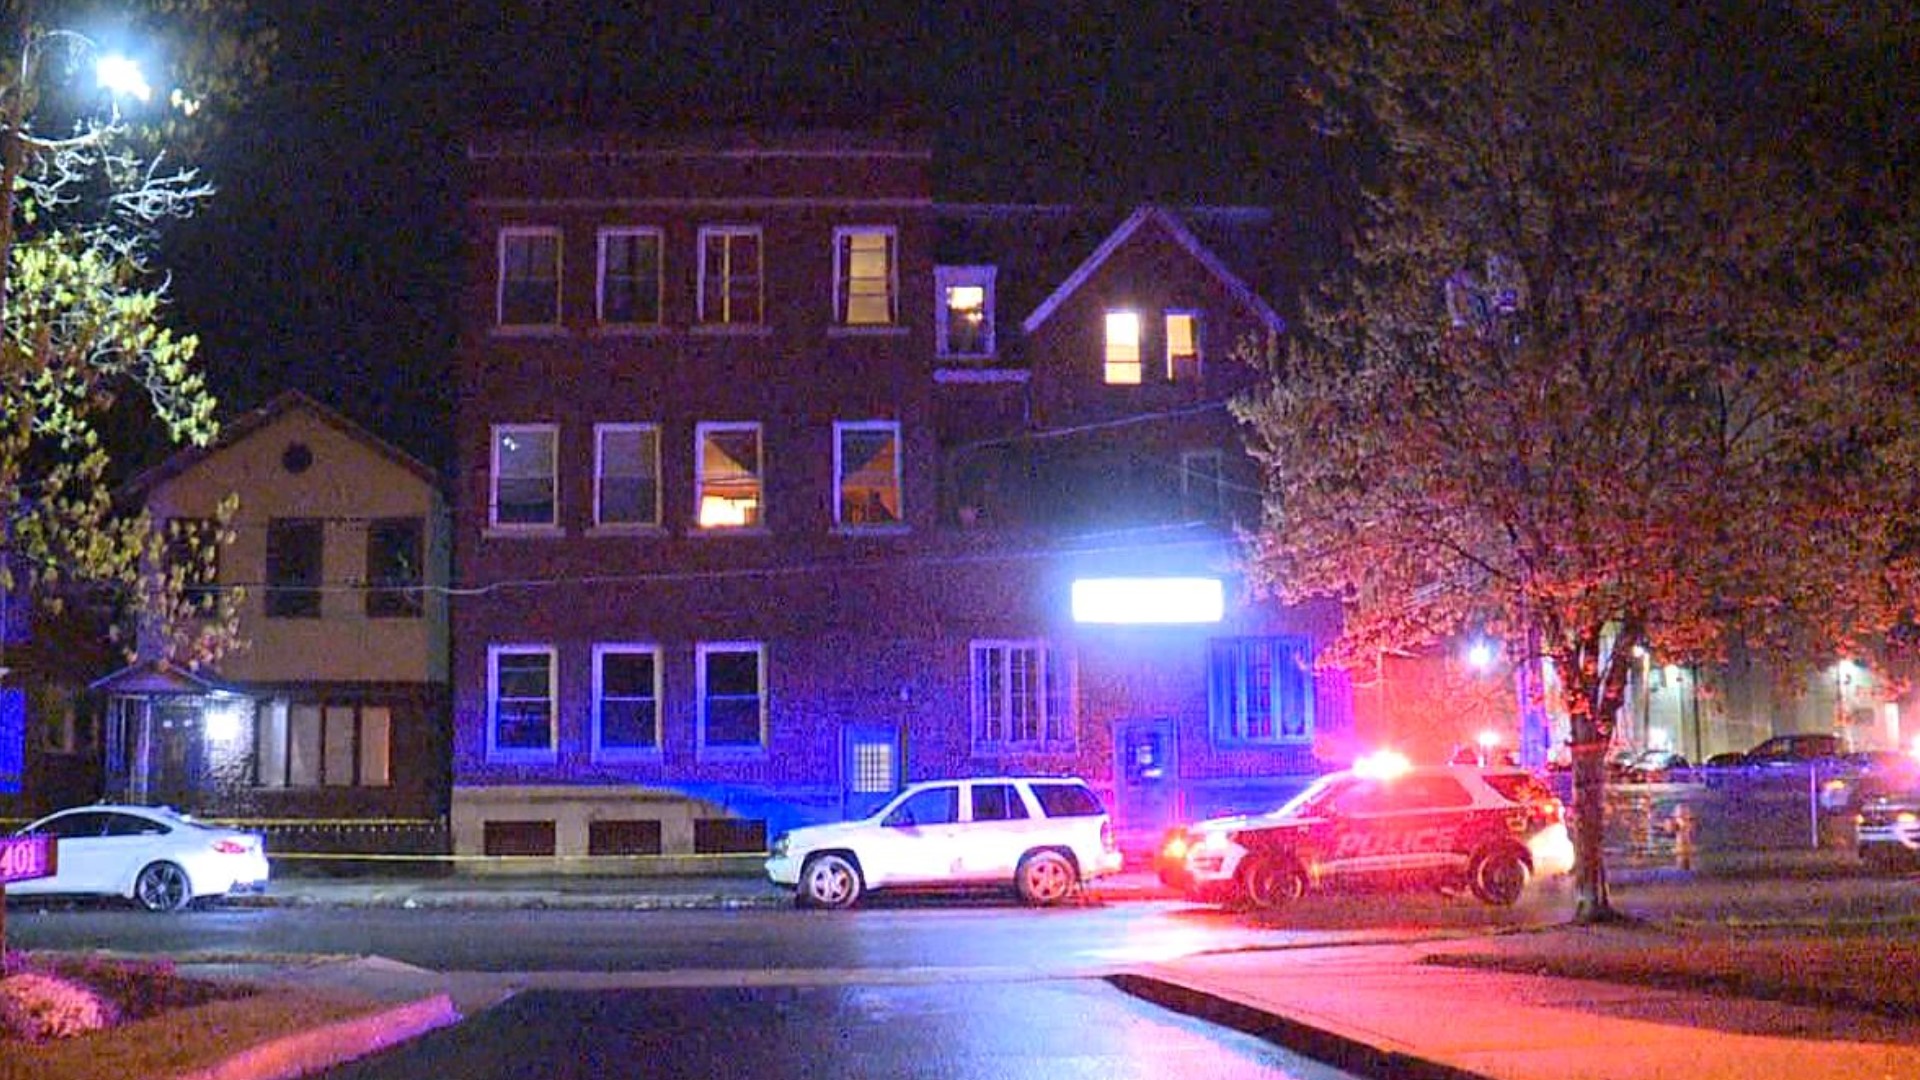 Police are investigating a deadly shooting in Wilkes-Barre.